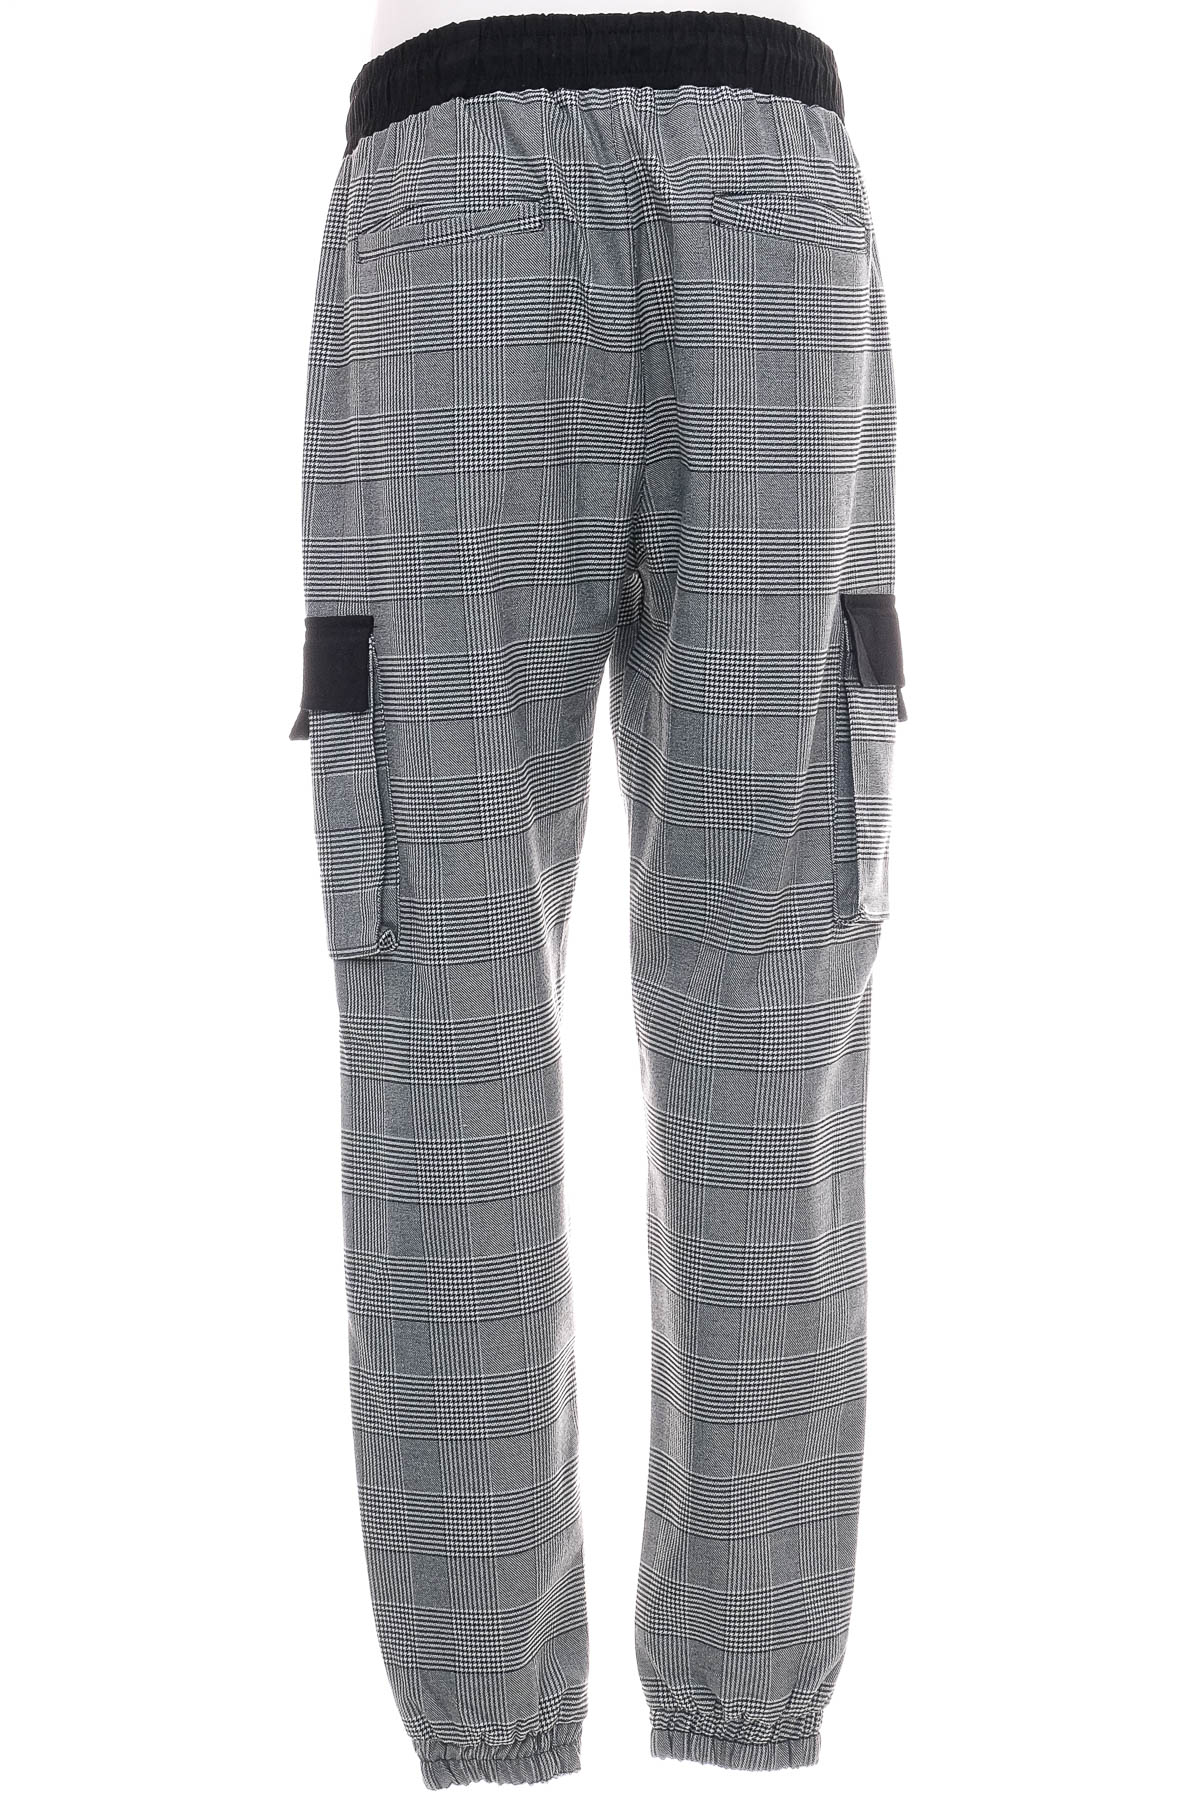 Men's trousers - DEF CLOTHING - 1